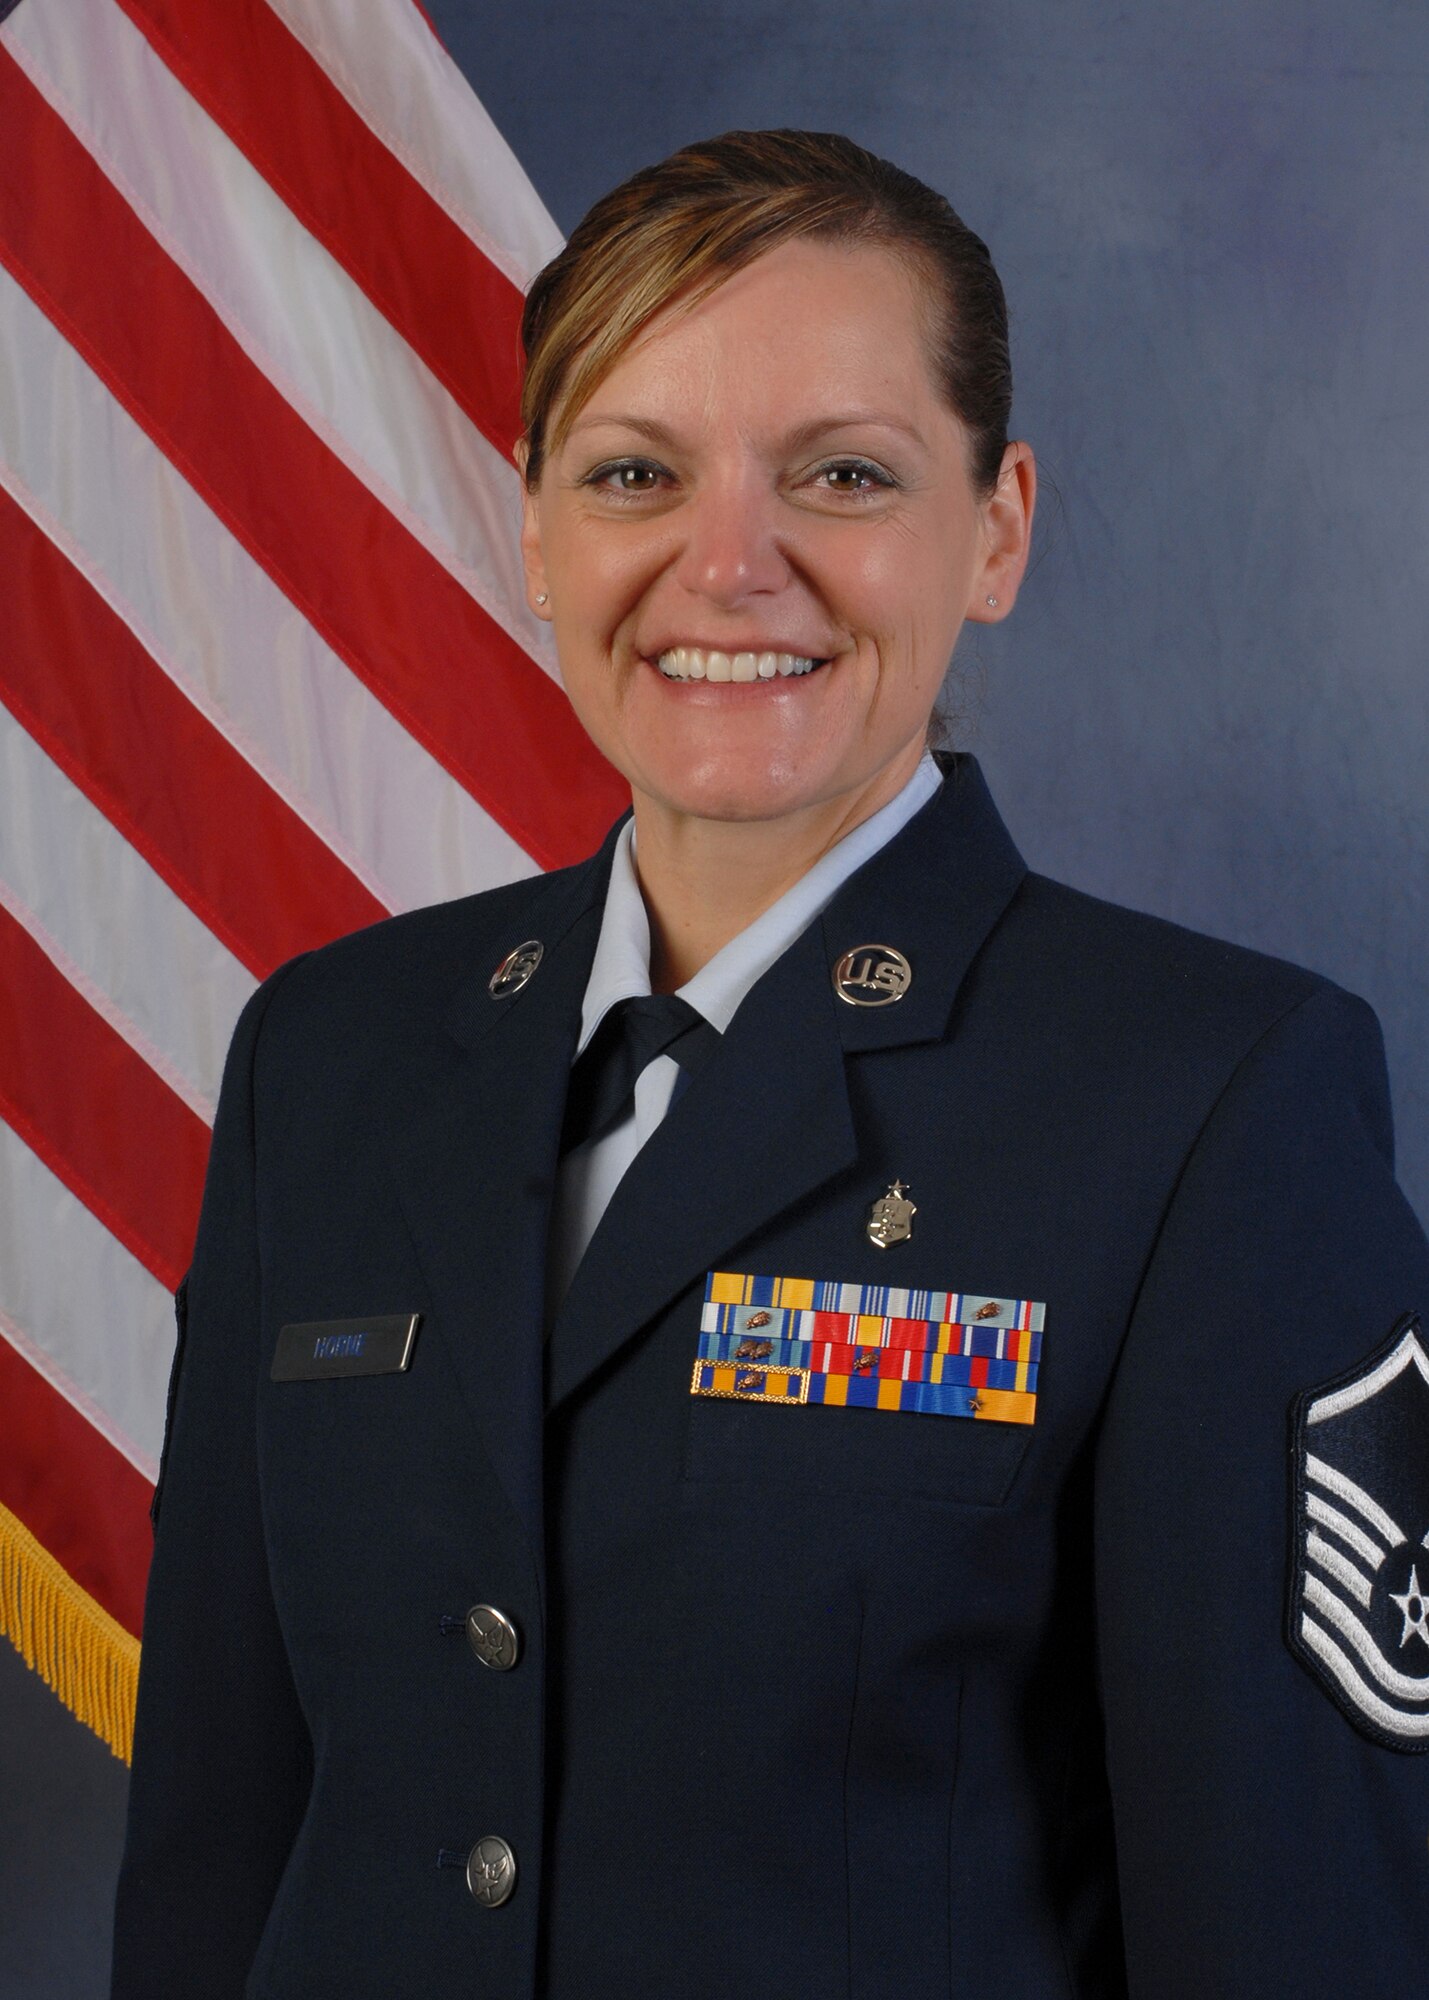 In 2015 Horne developed an occupational health tracking tool, streamlining the occupation health exam compliance by six percent. Her management of the occupation health program resulted in maintaining an exam rate above 93-percent. Horne was handpicked by the National Guard Bureau as subject matter expert for a staff assistance visit inspection and was actively recruited to be the next career field functional manager.

She conducted a vertical inspection on the 142nd public health programs, directly resulting in a highly effect rating during their wing Unit Effectiveness Inspection. Horne is also dedicated to self-improvement, working on her master’s in Public Health while maintaining a 4.0 grade point average. She dedicates her time to the base and community as an avid supporter of base member career progression, wing family day, and the Rocky Mountain Elk Foundation.
